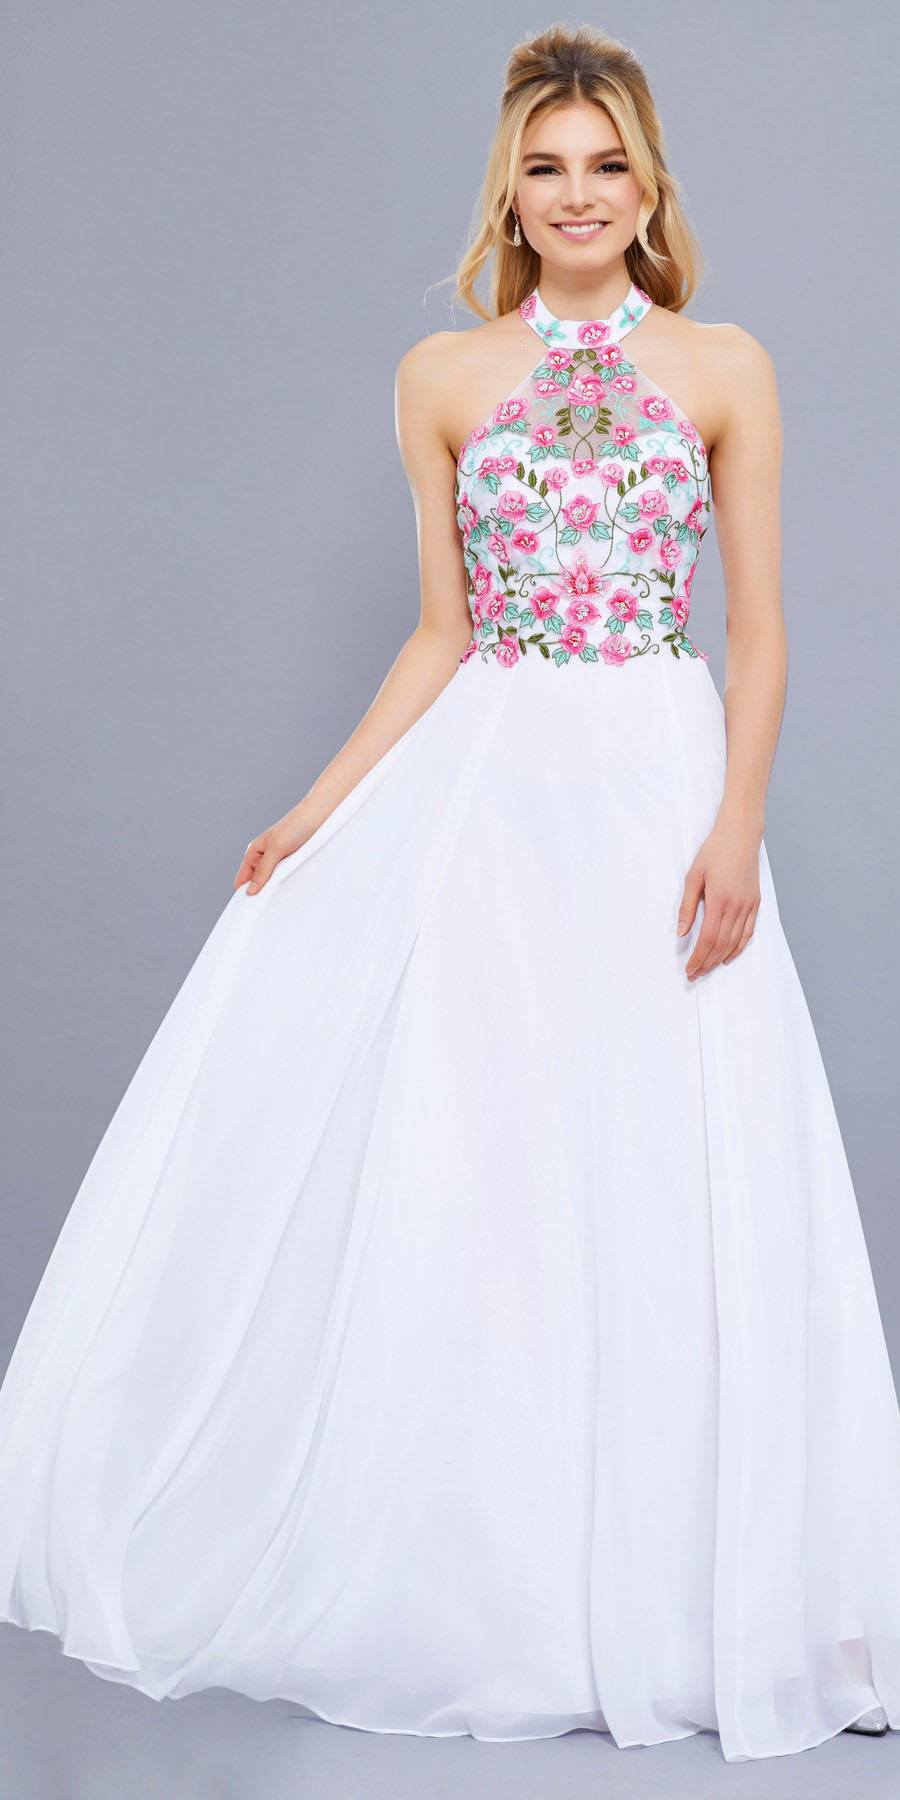 white embroidered prom dress